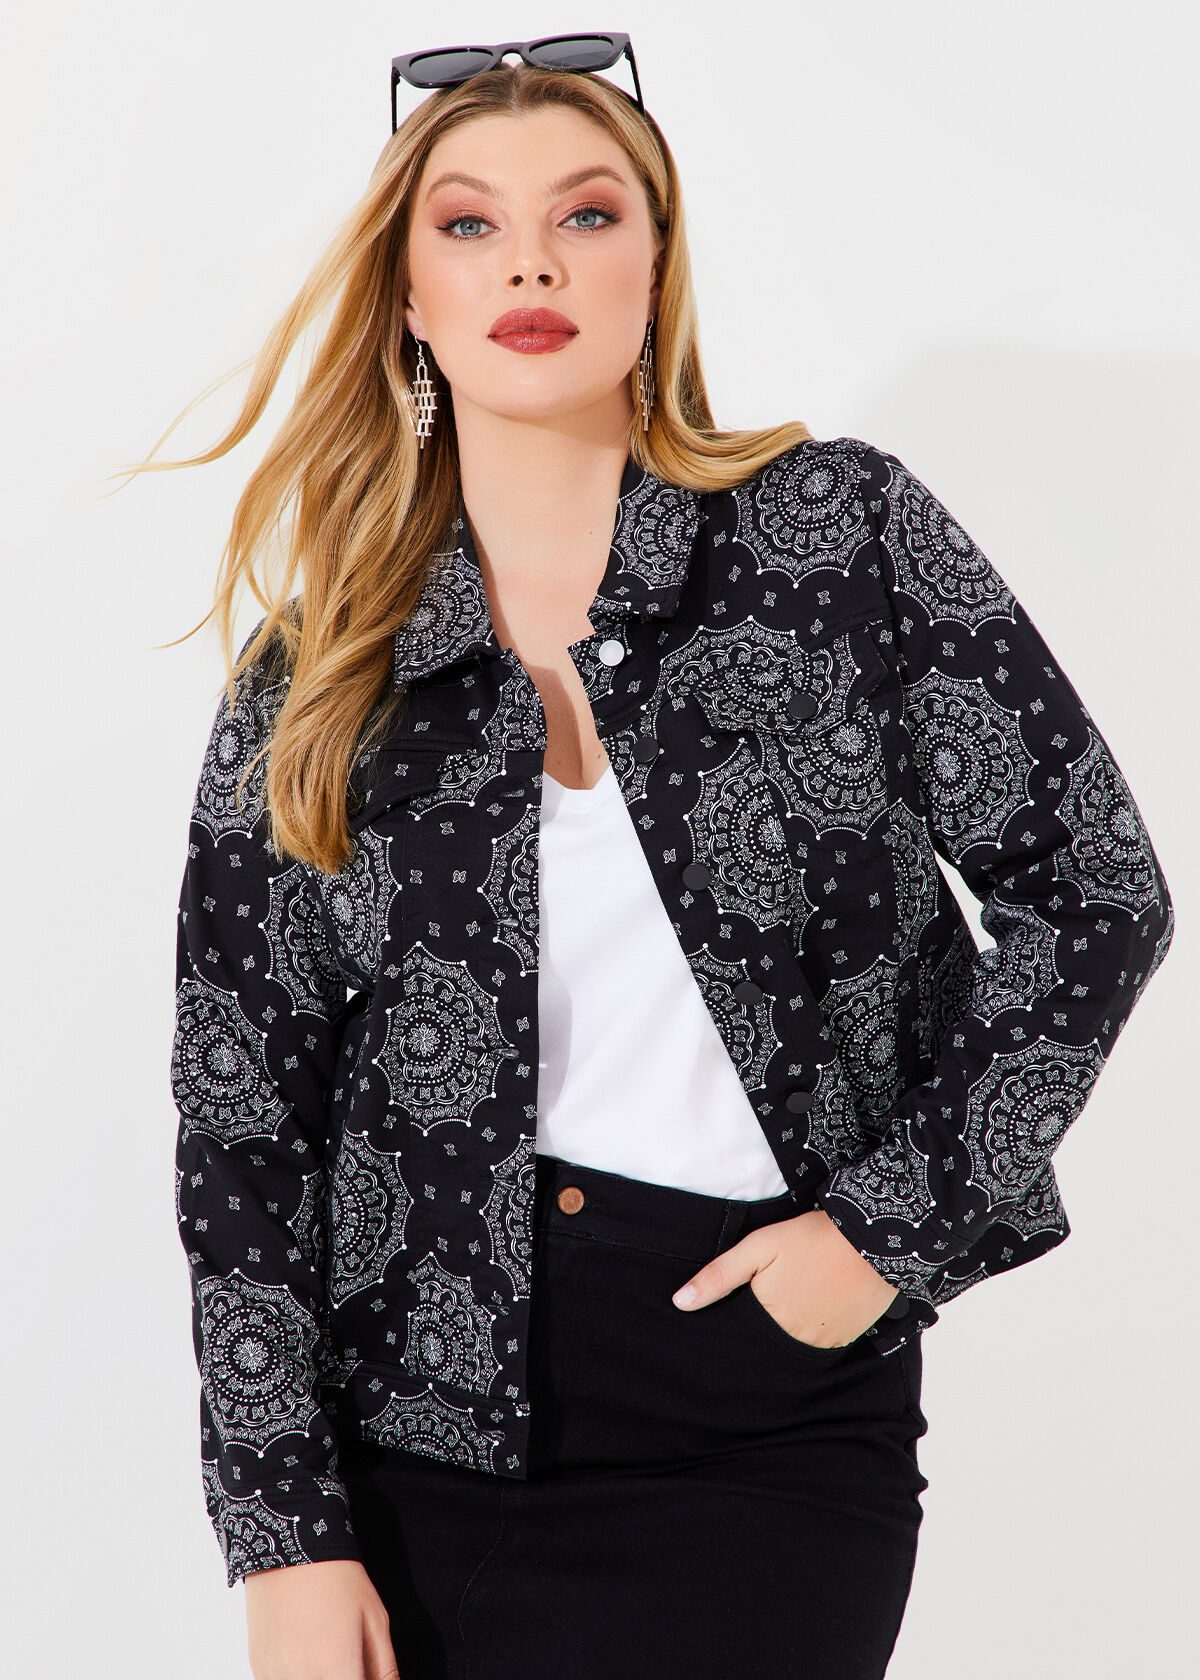 Plus-Size Denim Jackets Shopping Guide | 23 Jackets to Shop